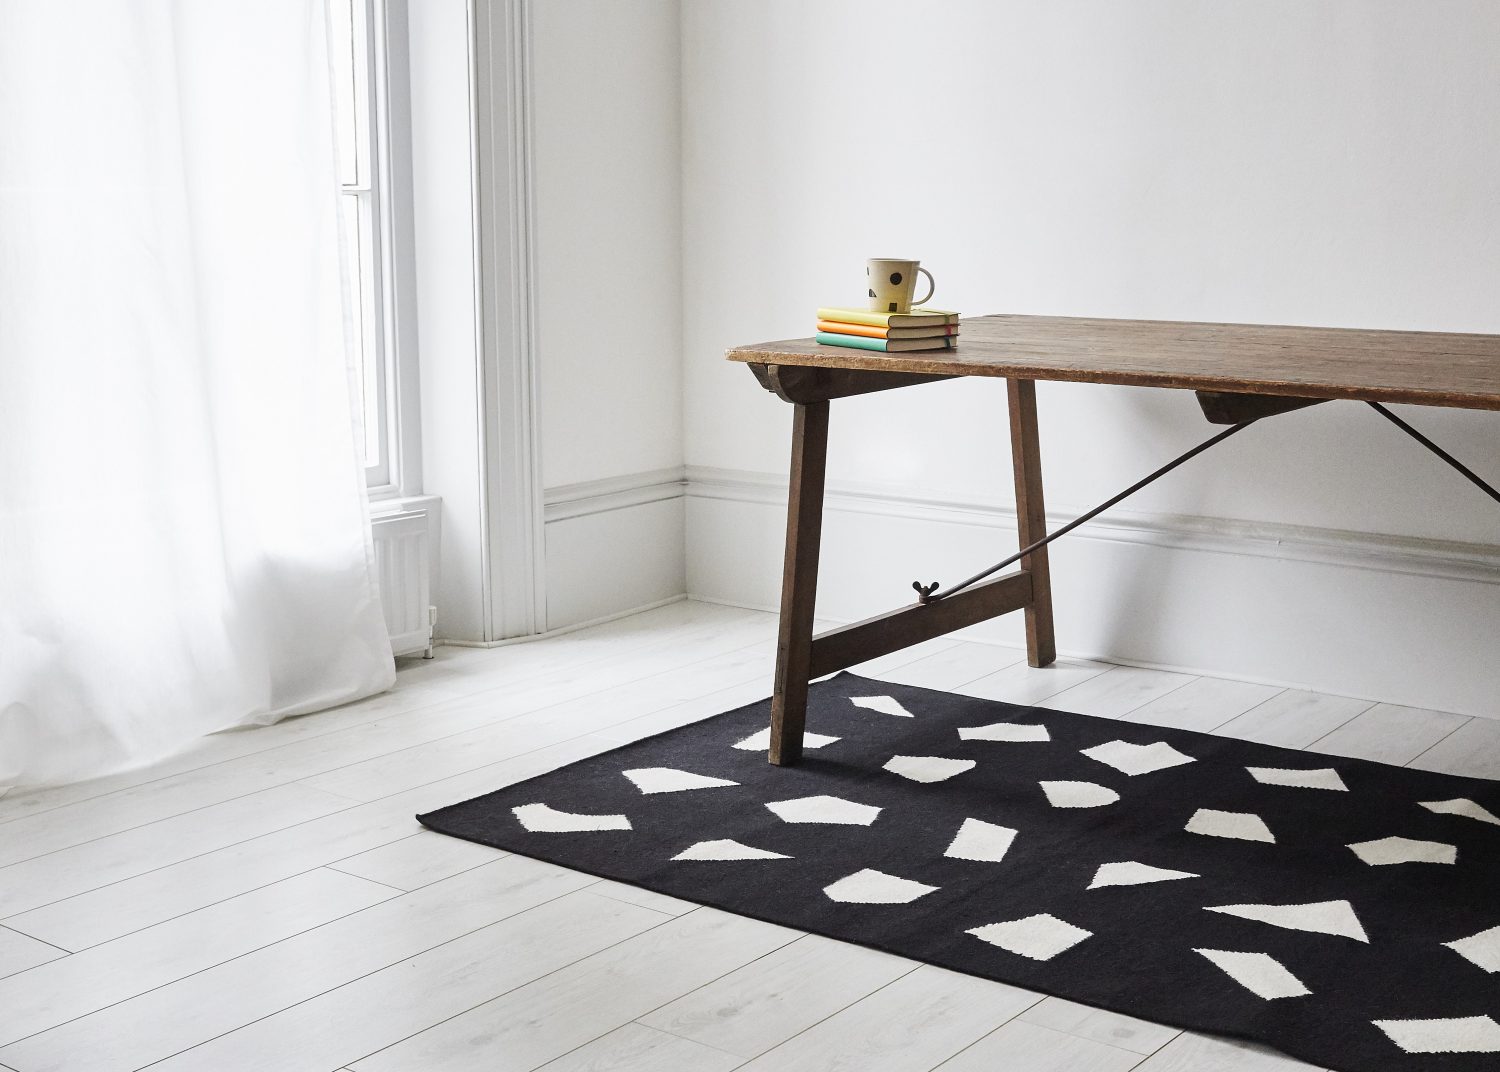 Unusual shapes and high-contrast define this modern kilim